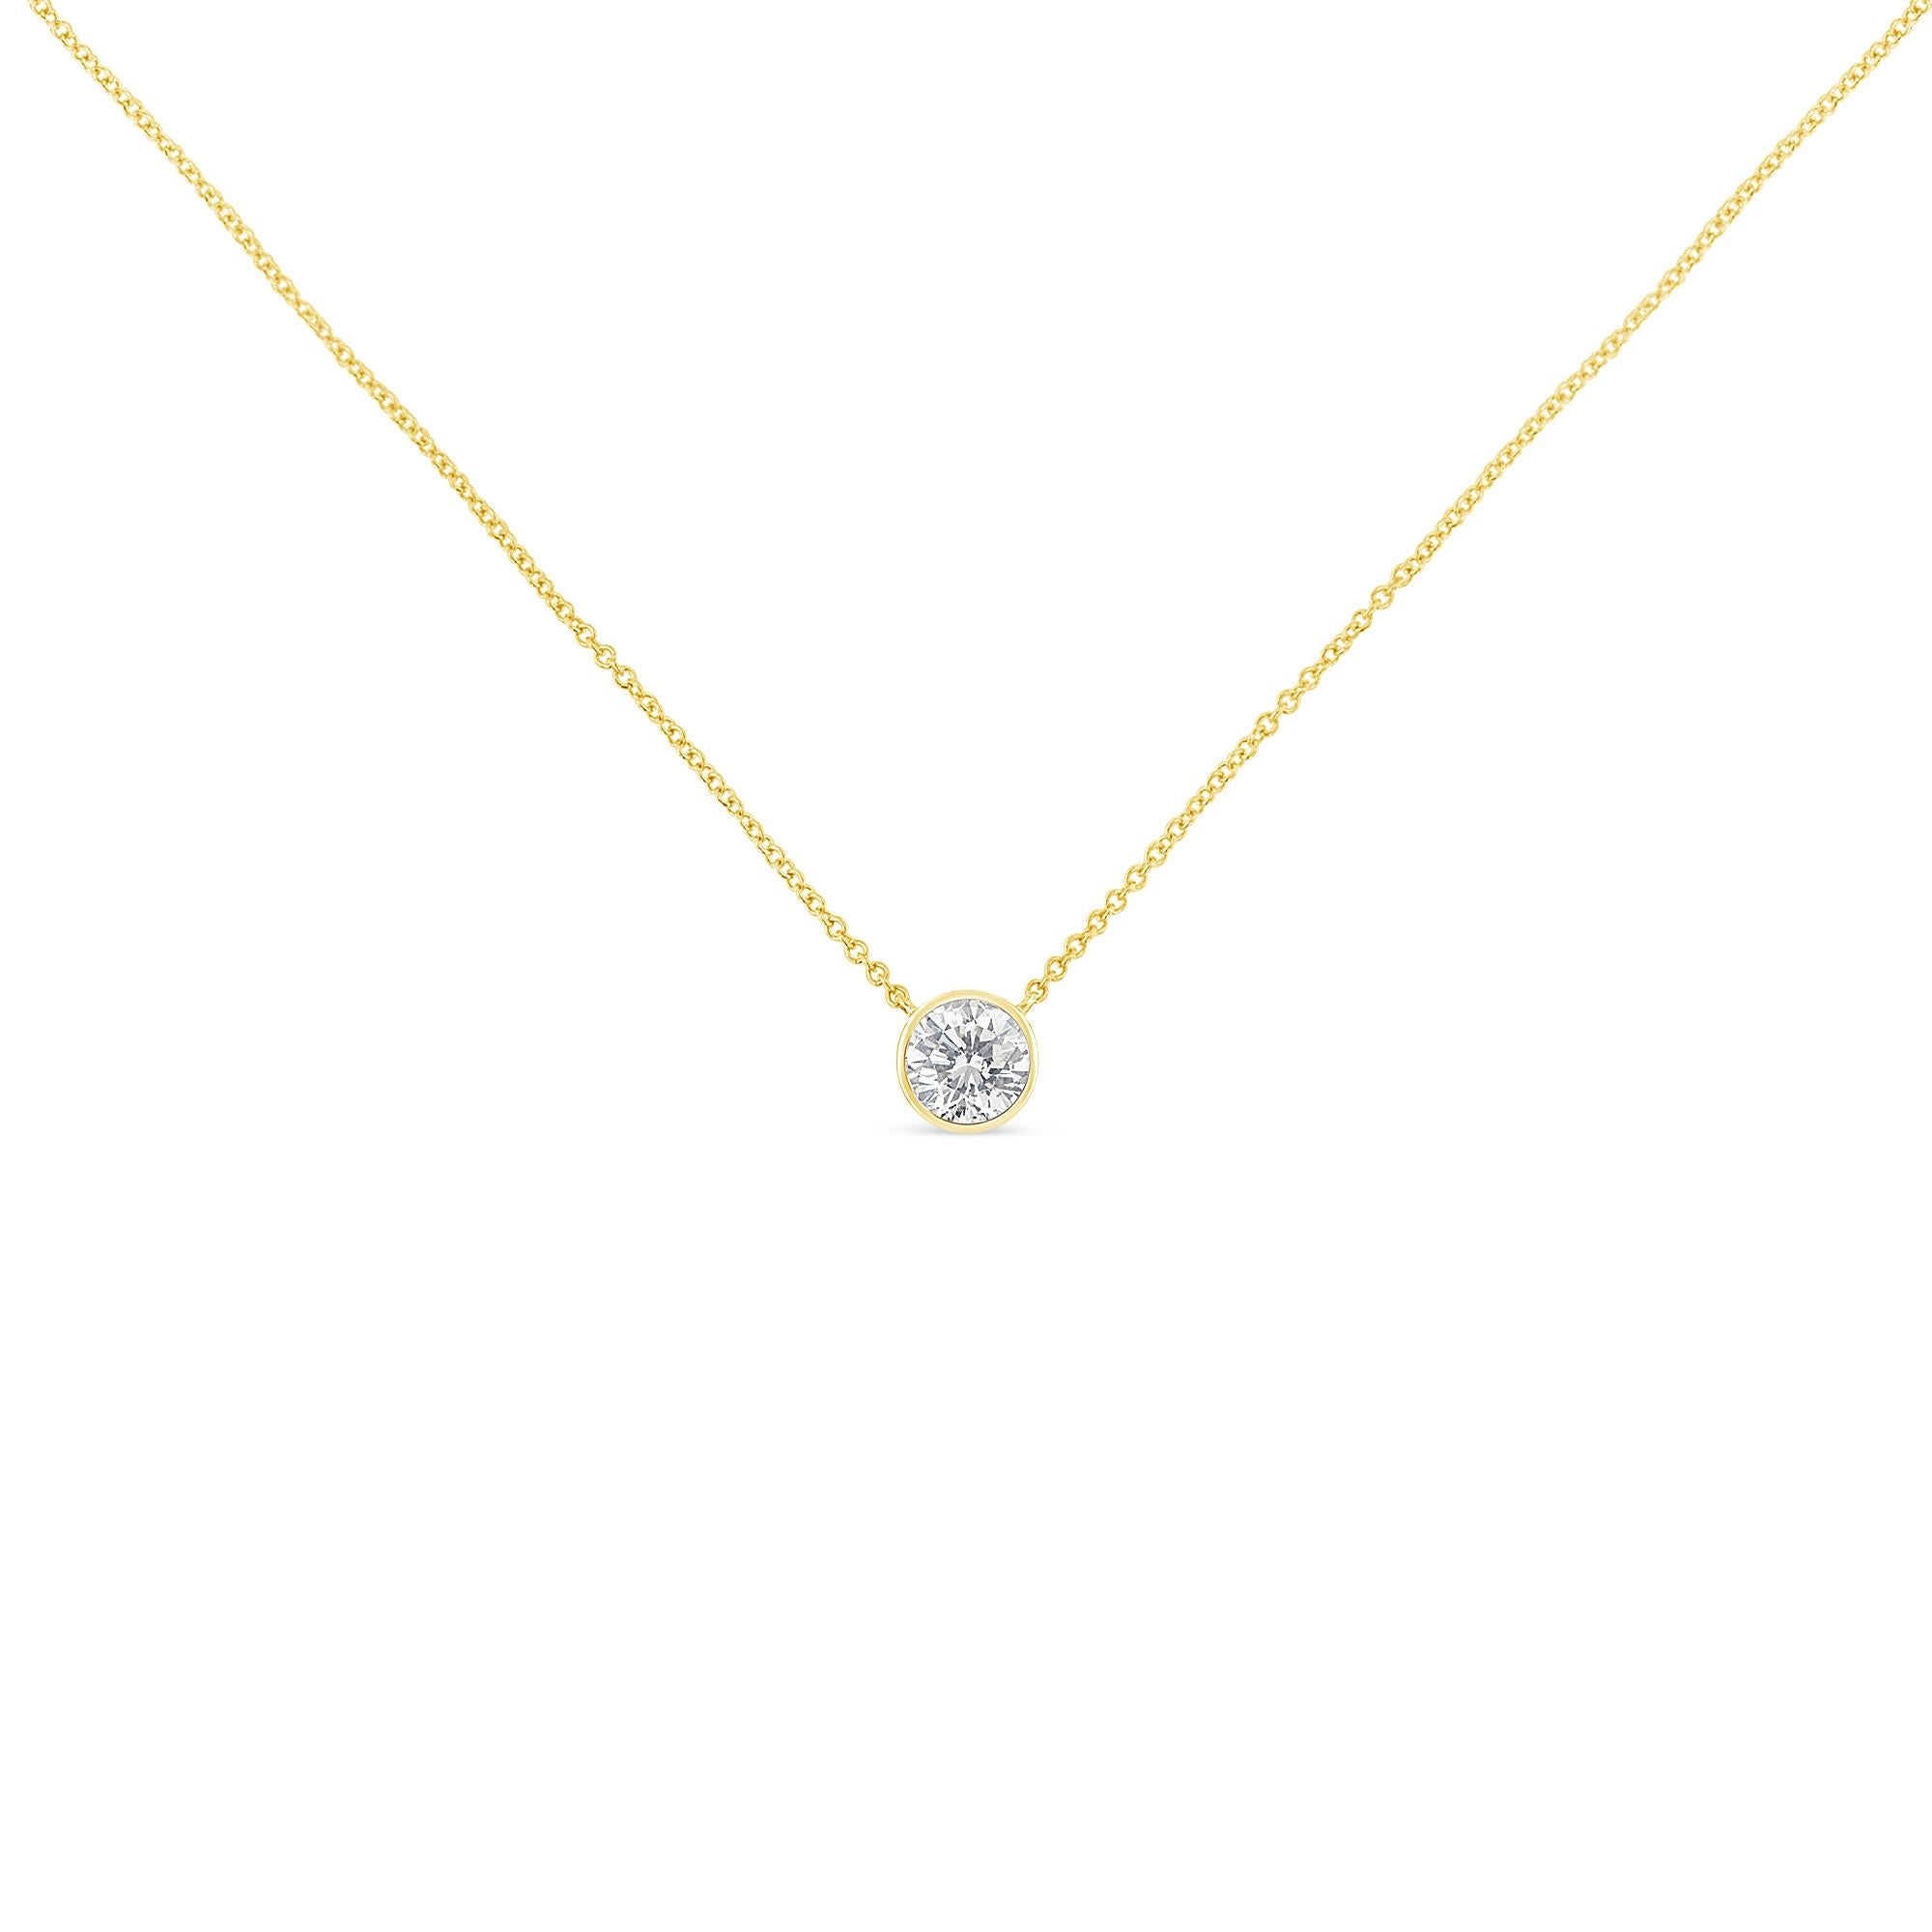 Some things shouldn't be reinvented, which is why we created the Solitaire Diamond Necklace. This is the perfect way to highlight every big occasion, transition, and personal achievement in your life. This Solitaire Diamond Necklace features a